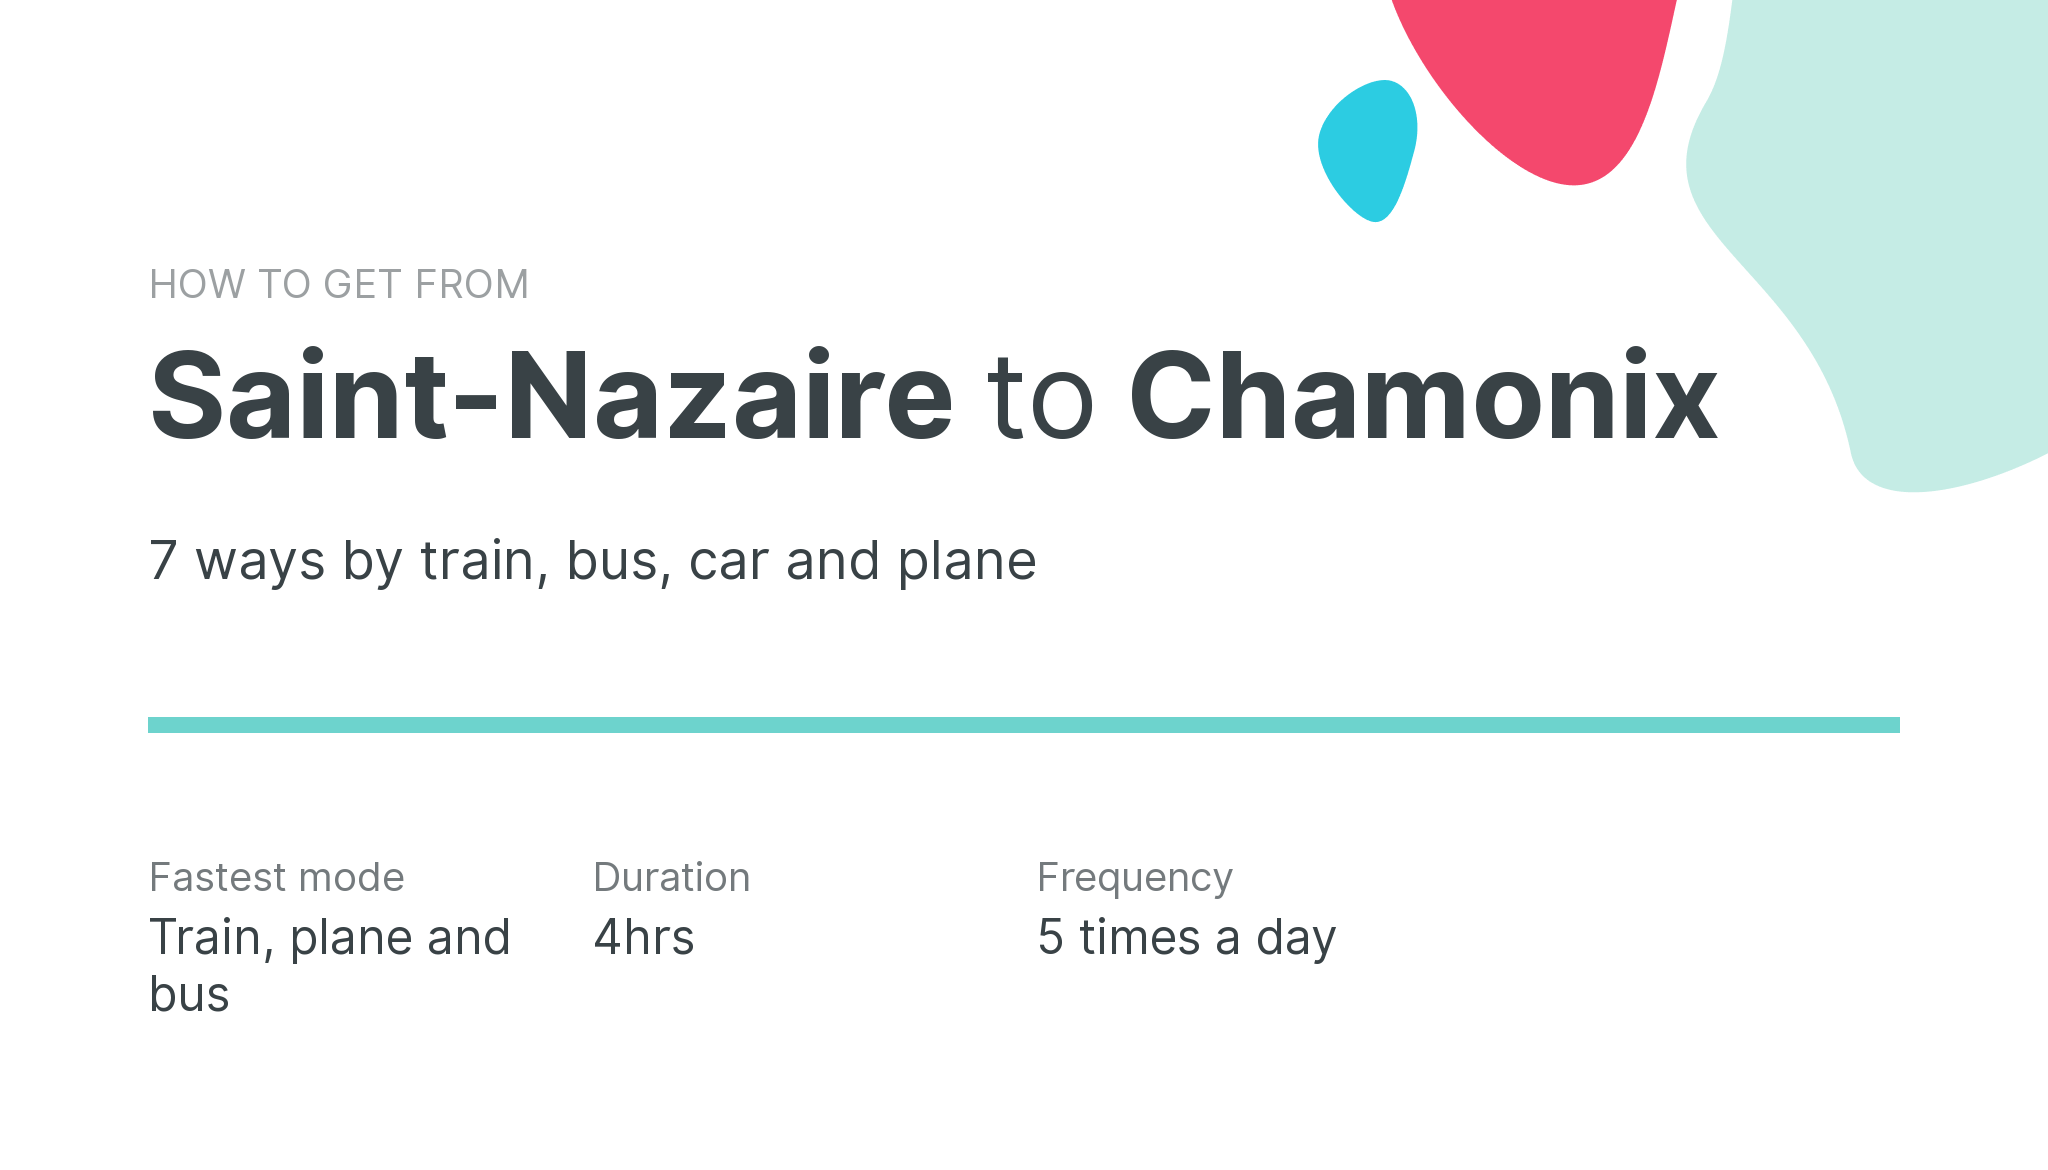 How do I get from Saint-Nazaire to Chamonix